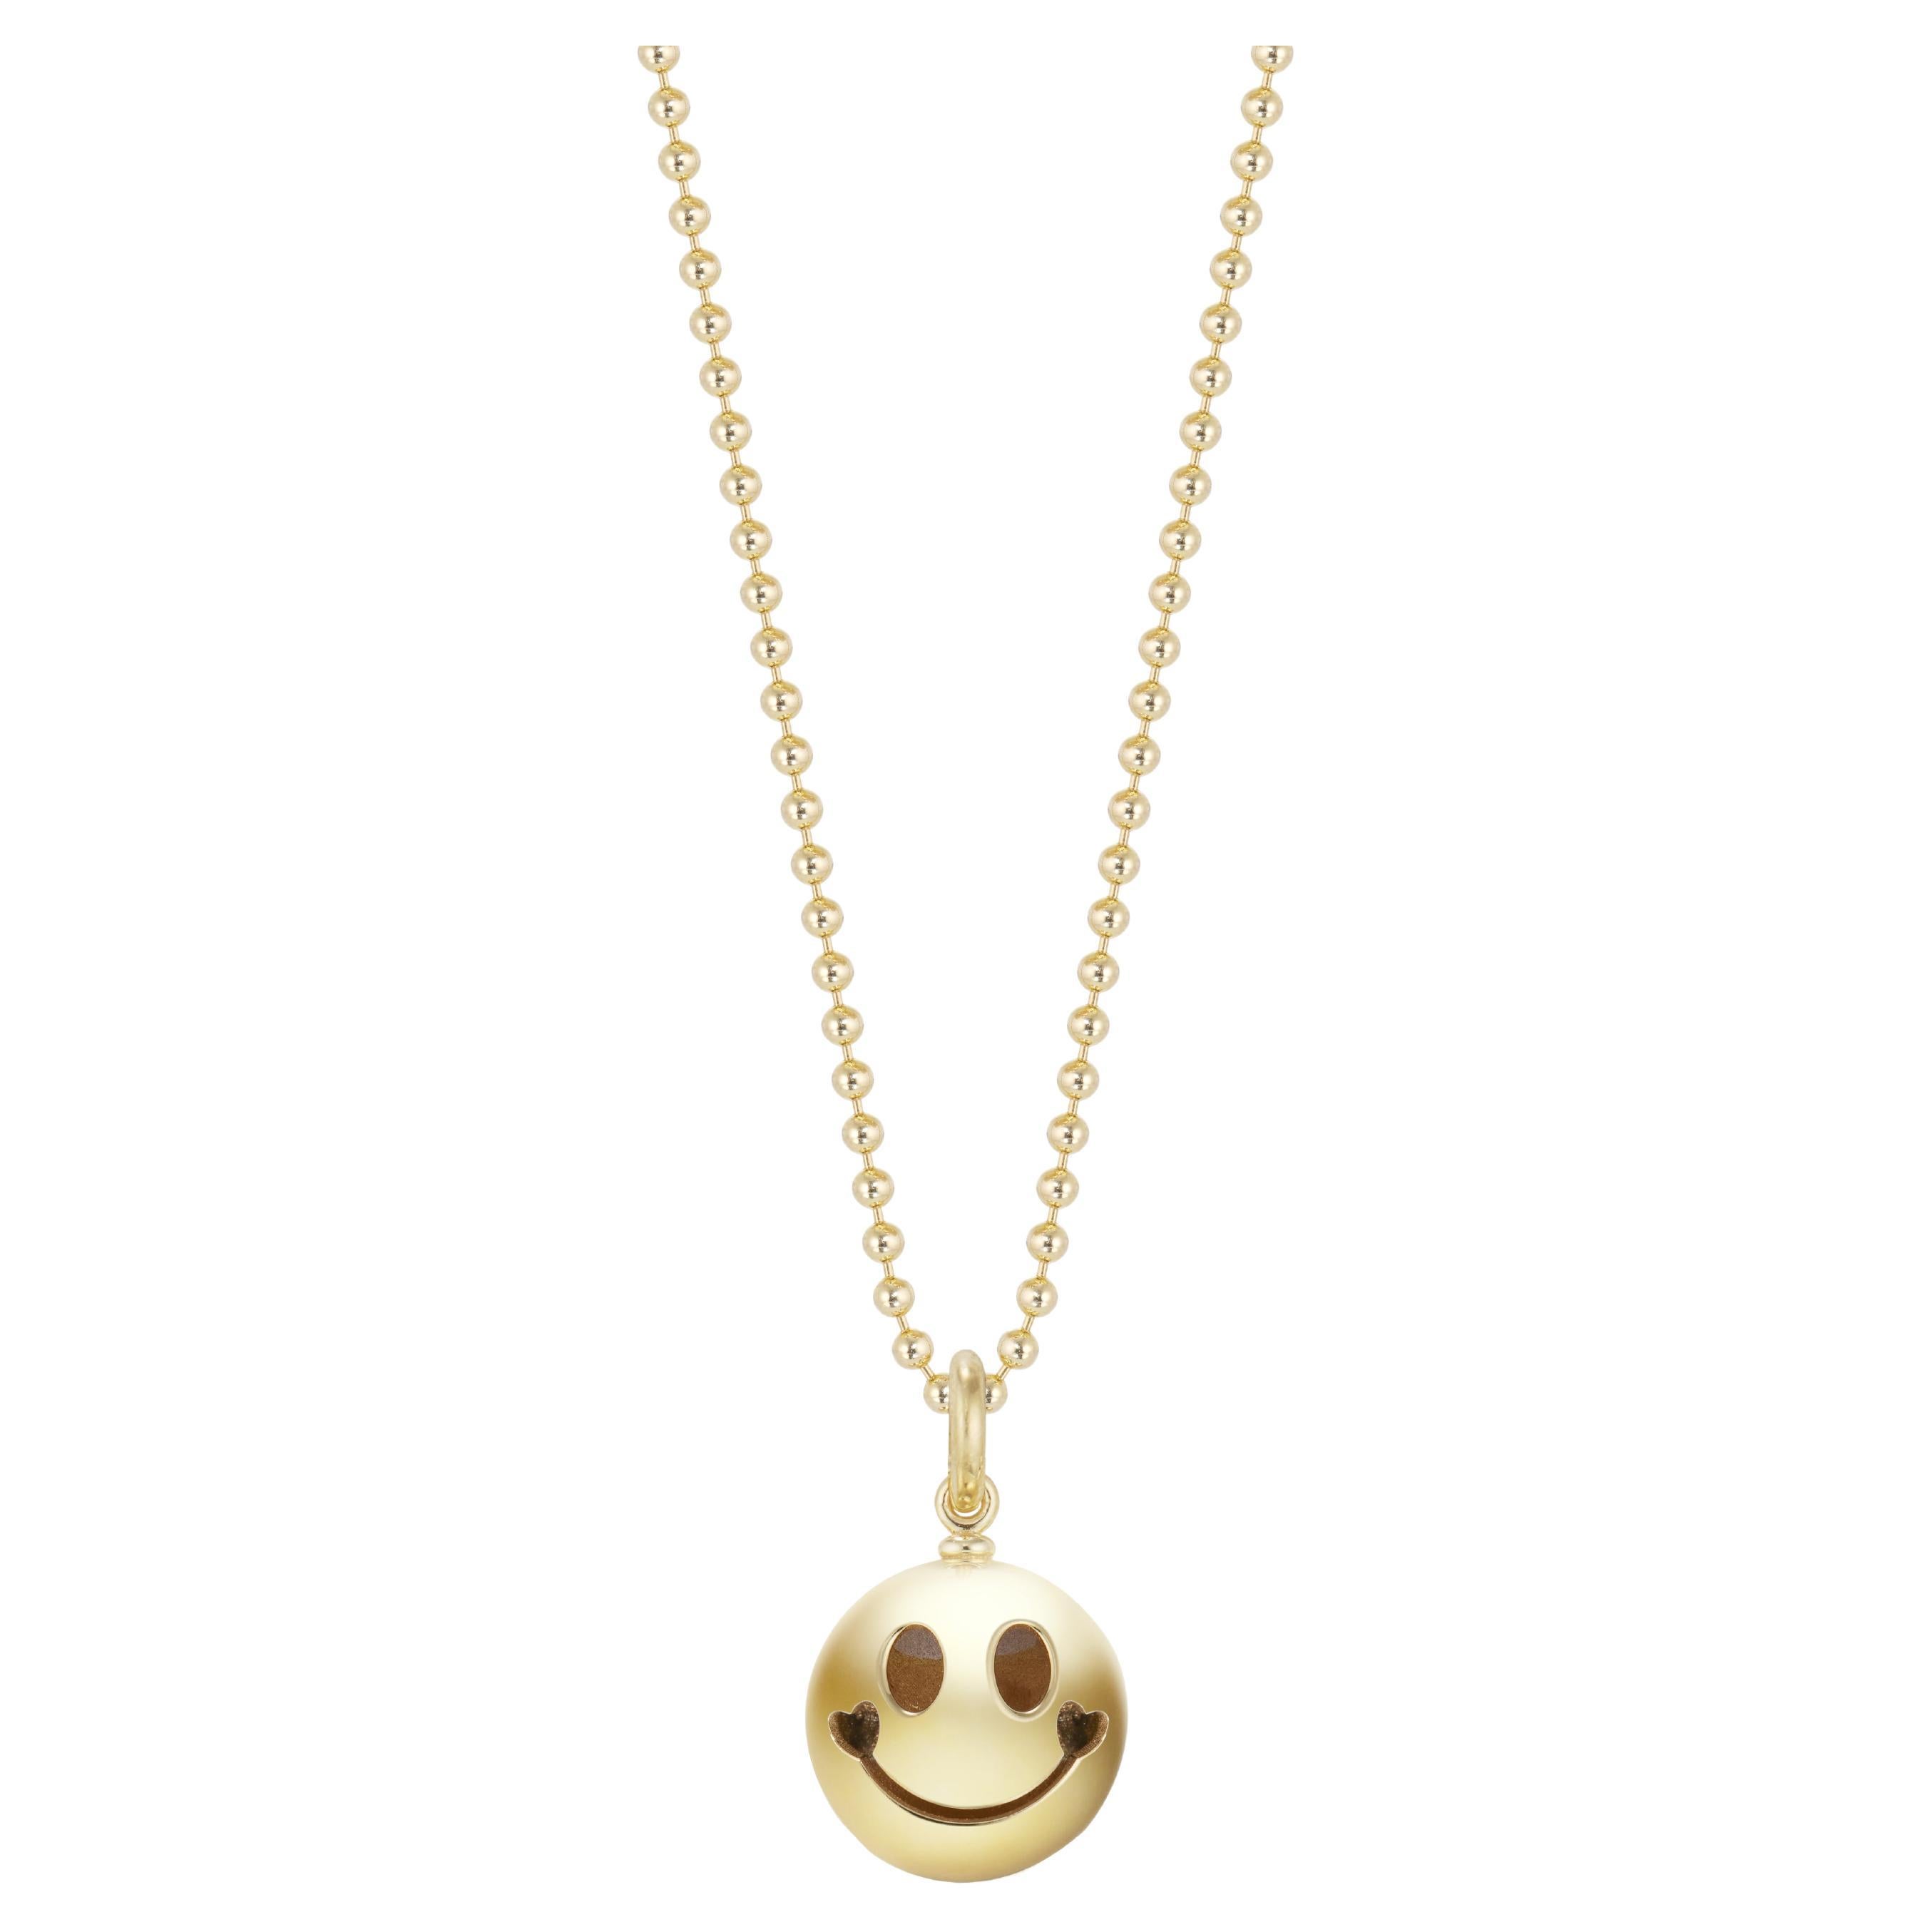 Zoma Design Mini 14 Carat Yellow Gold Smiley Heart Pendant Necklace For Sale